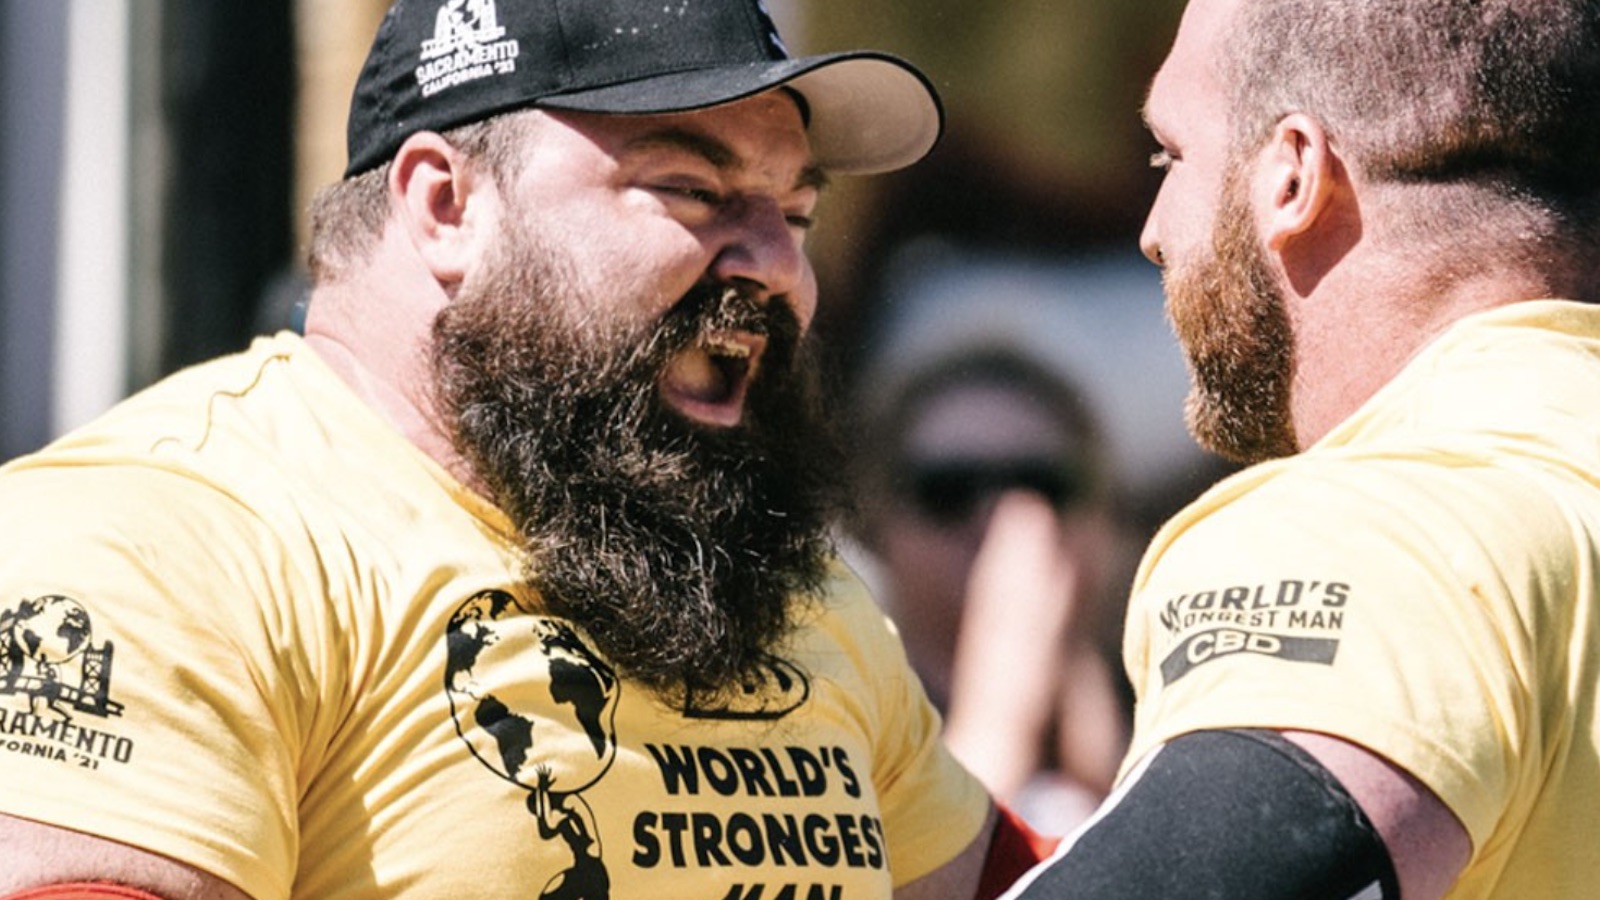 How To Watch the 2023 World’s Strongest Man